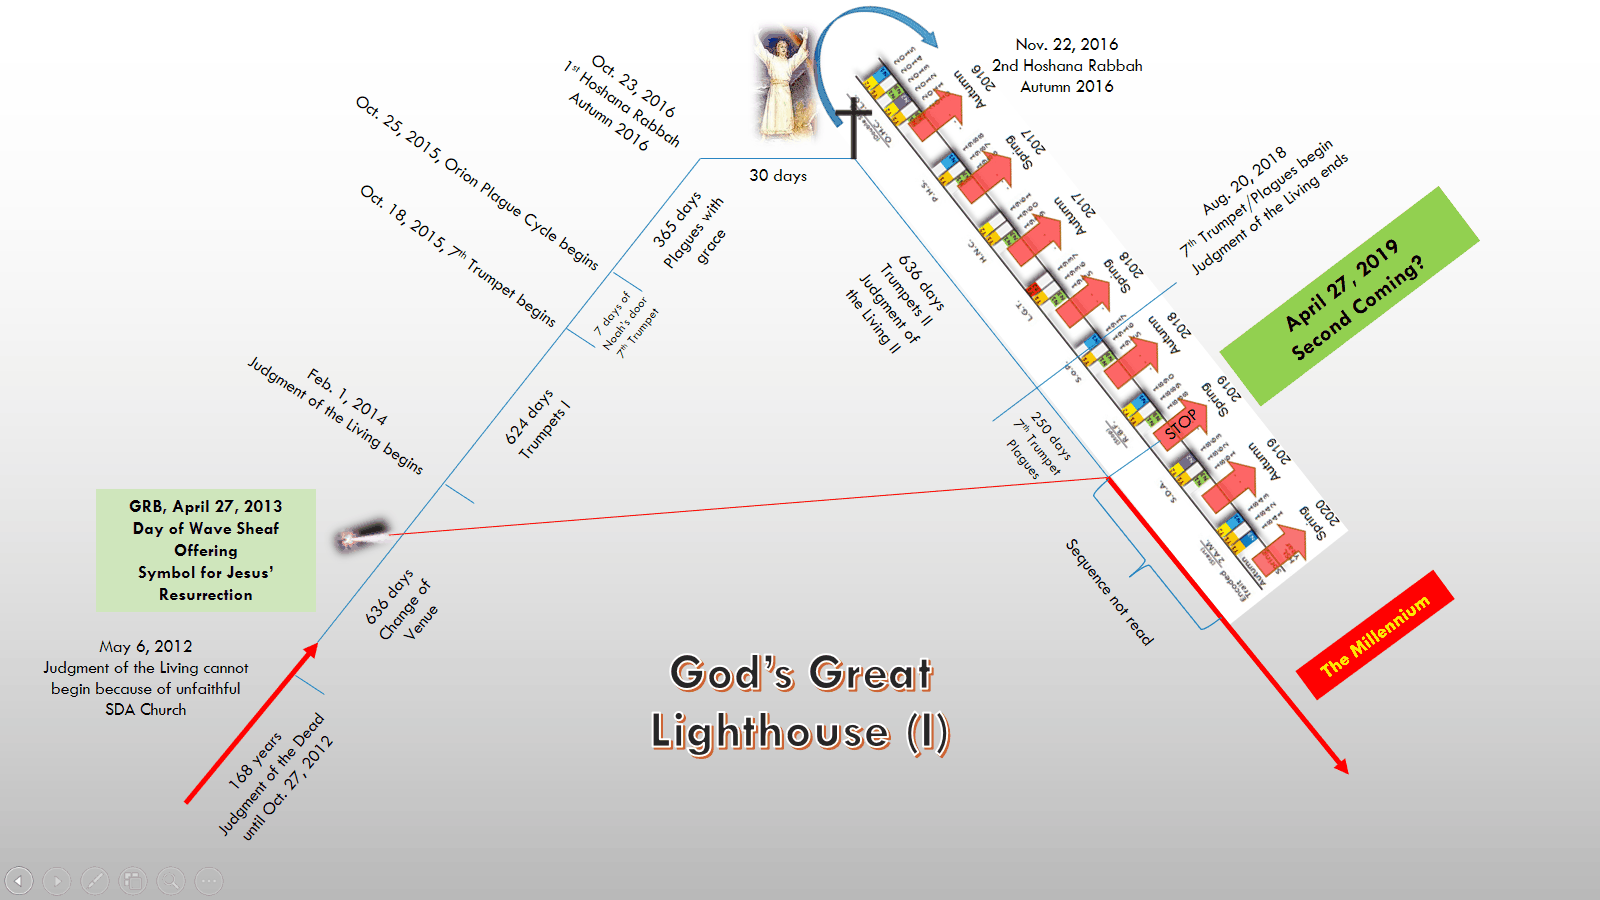 The Great Lighthouse of God (I)